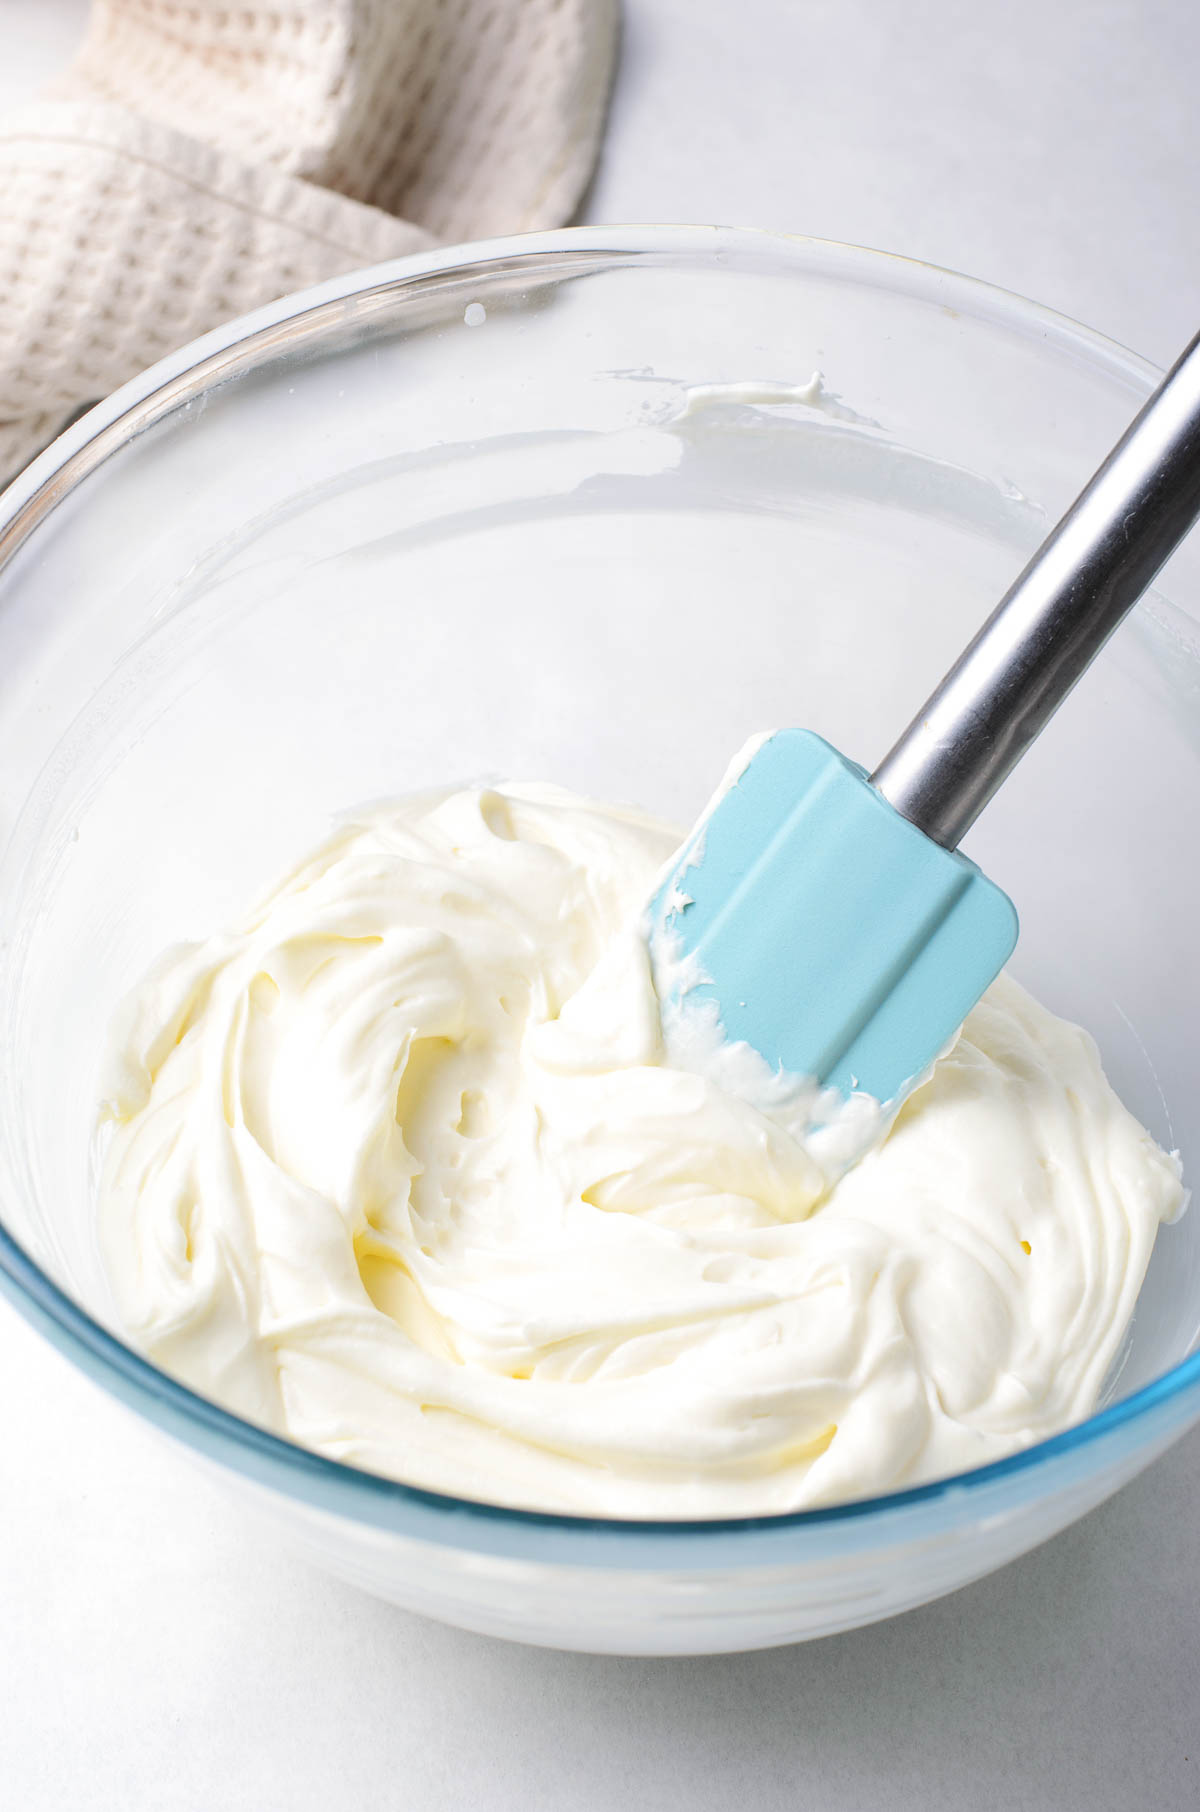 Folding whipped cream and cream cheese mixture